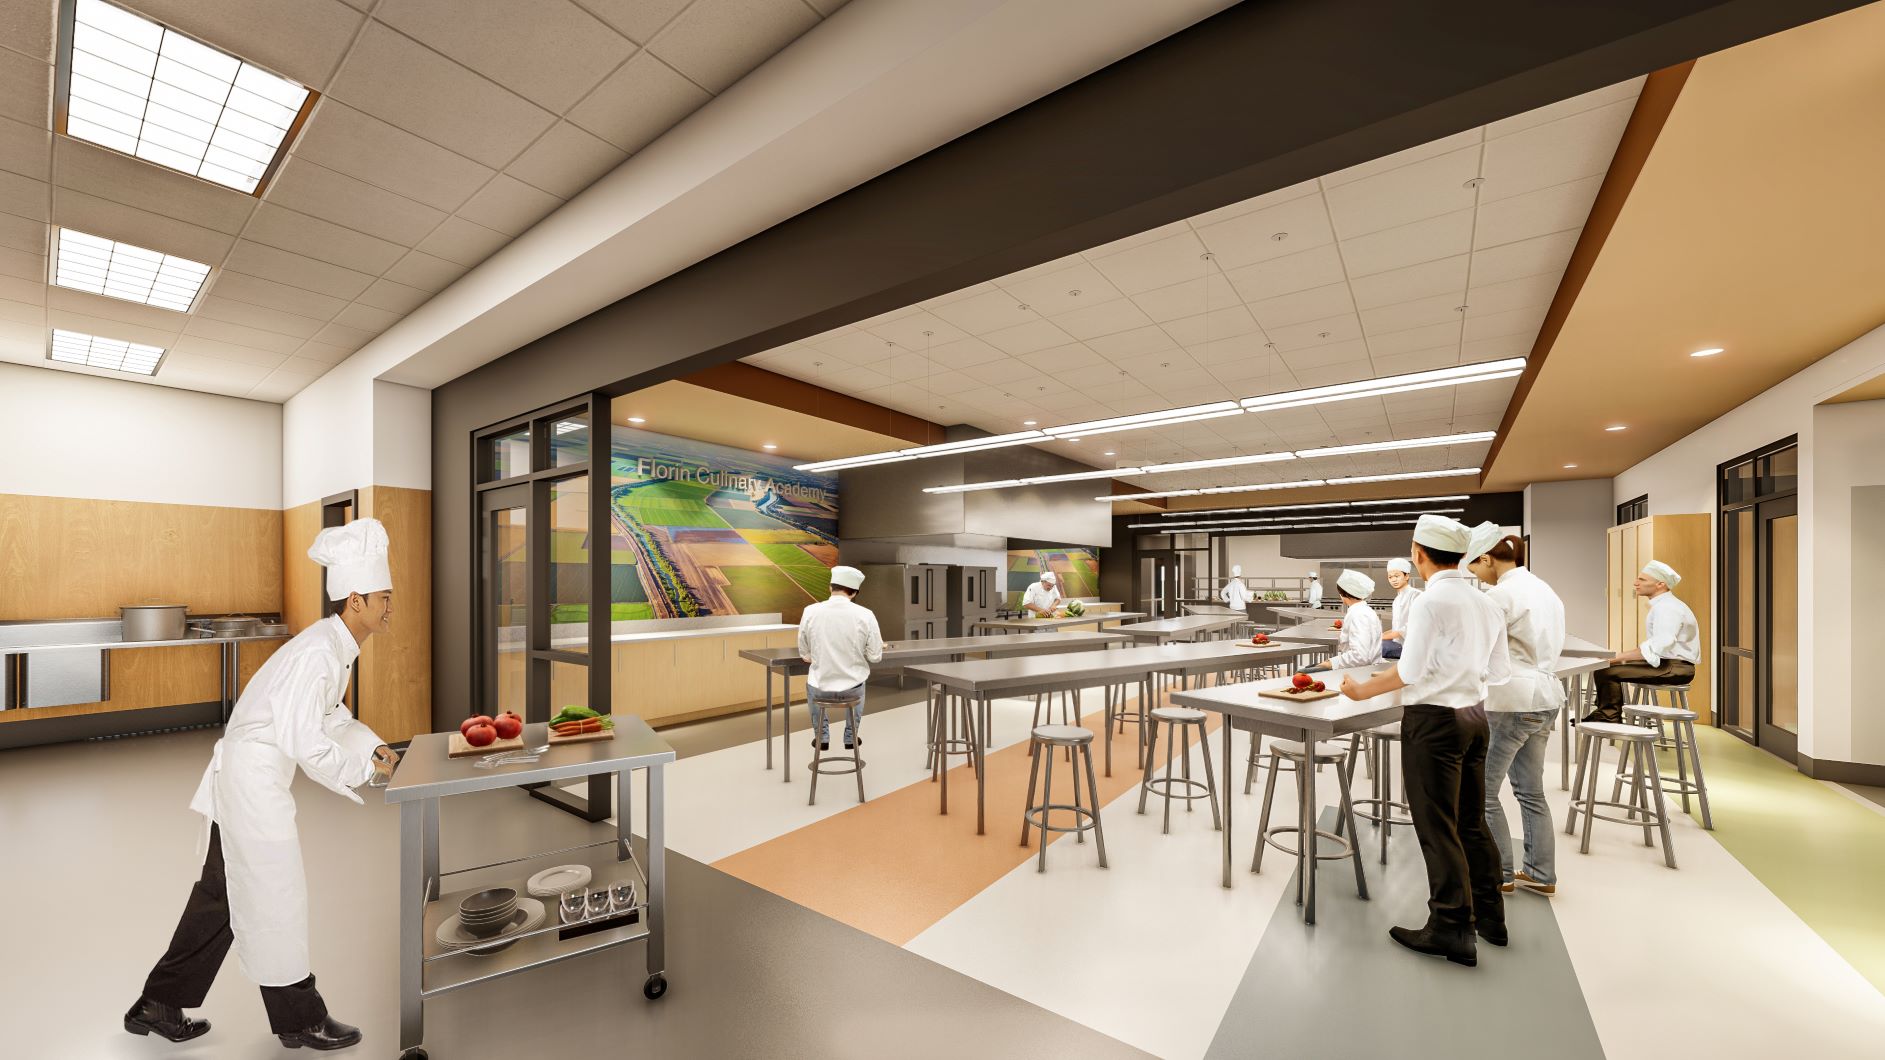 The 8,000-square-foot Florin High School Agriculture, Culinary, and Engineering CTE project will house two kitchen studios, a demonstration classroom, food storage and staff offices.